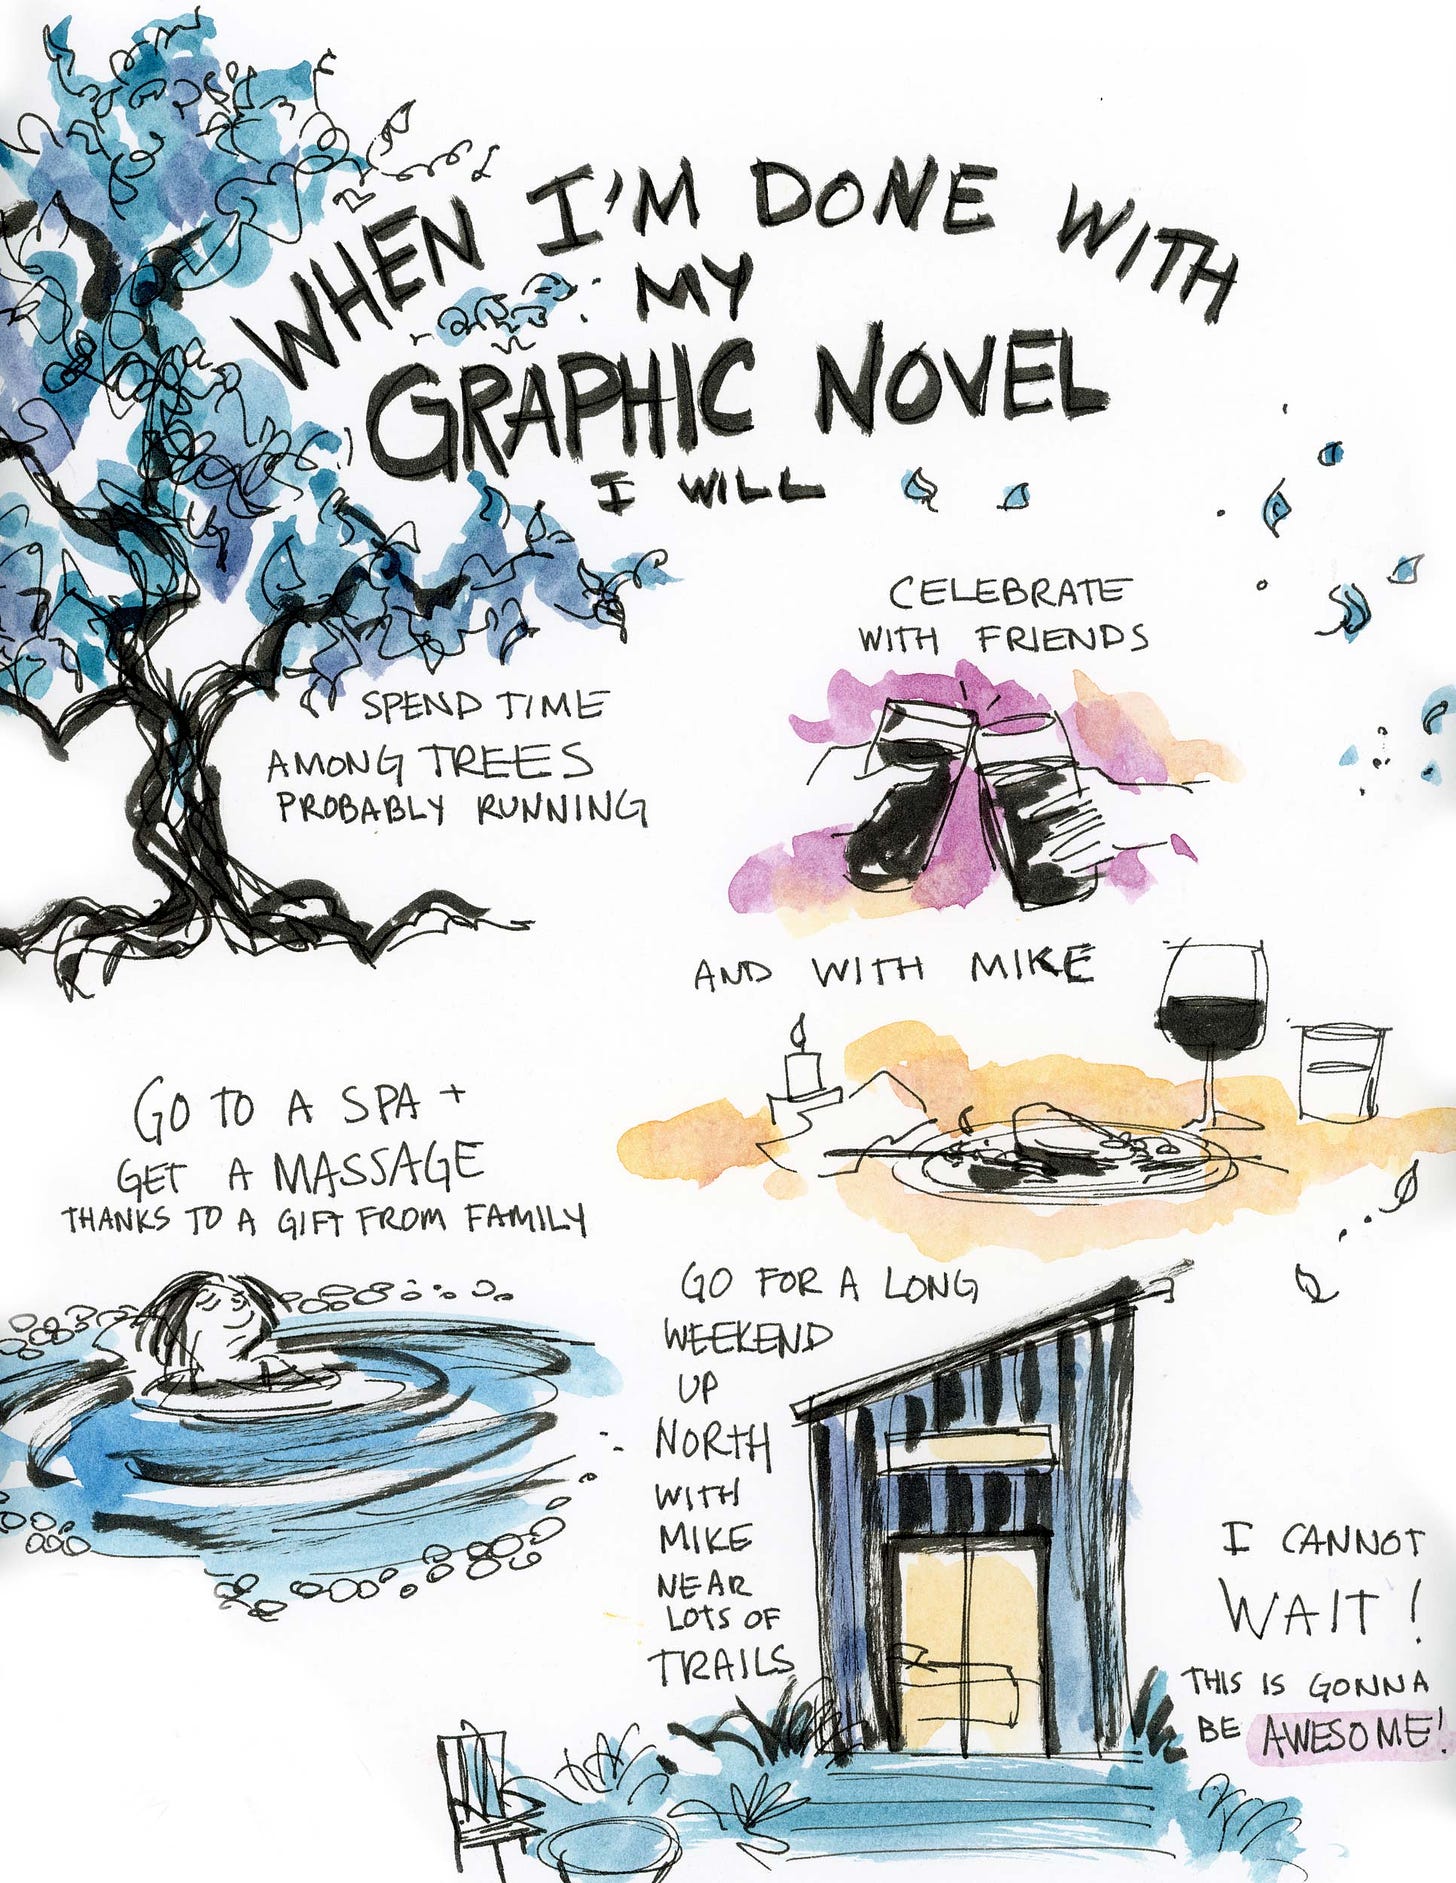 Diary comic by graphic novelist K. Woodman-Maynard about what she'll do when she'd one with her graphic novel.